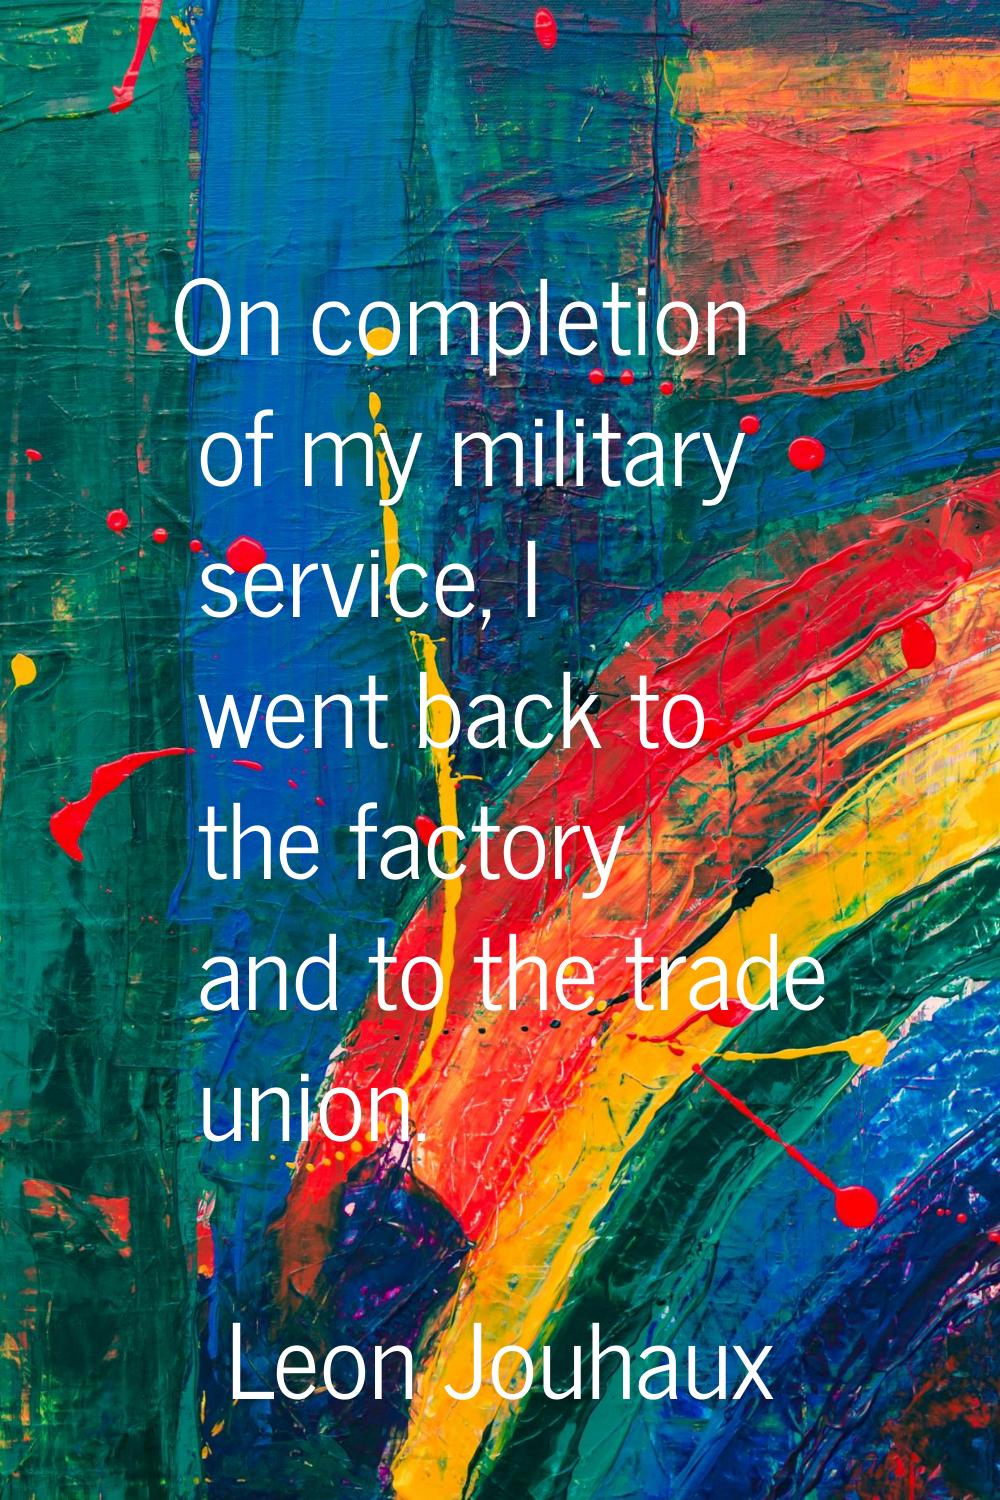 On completion of my military service, I went back to the factory and to the trade union.